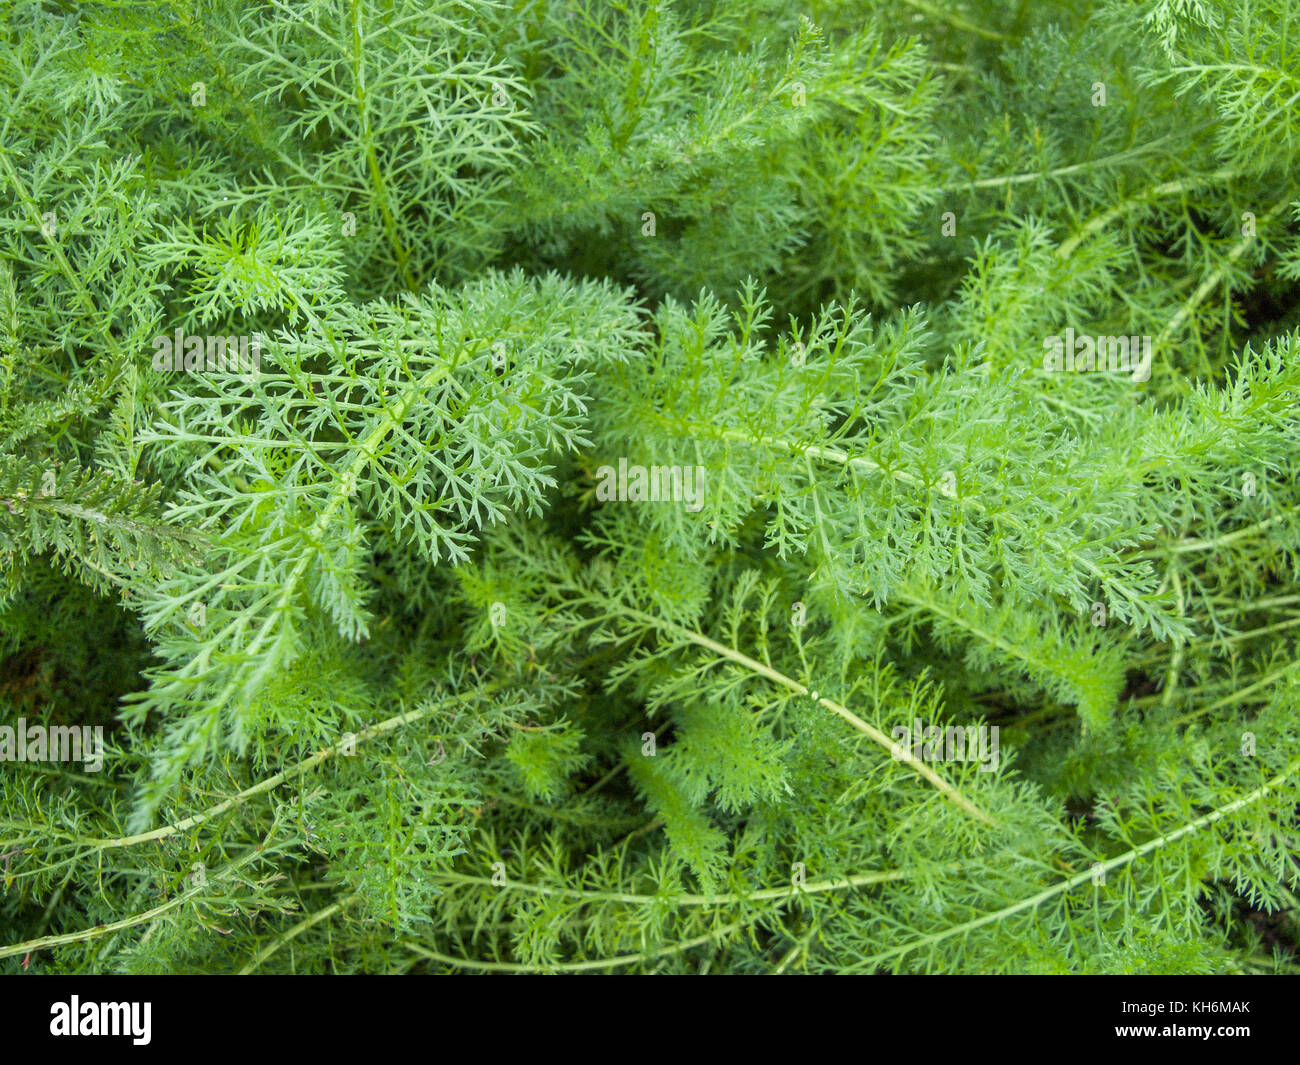 Frothy young foliage of the woundherb known as Yarrow (Achillea millefolium). Stock Photo